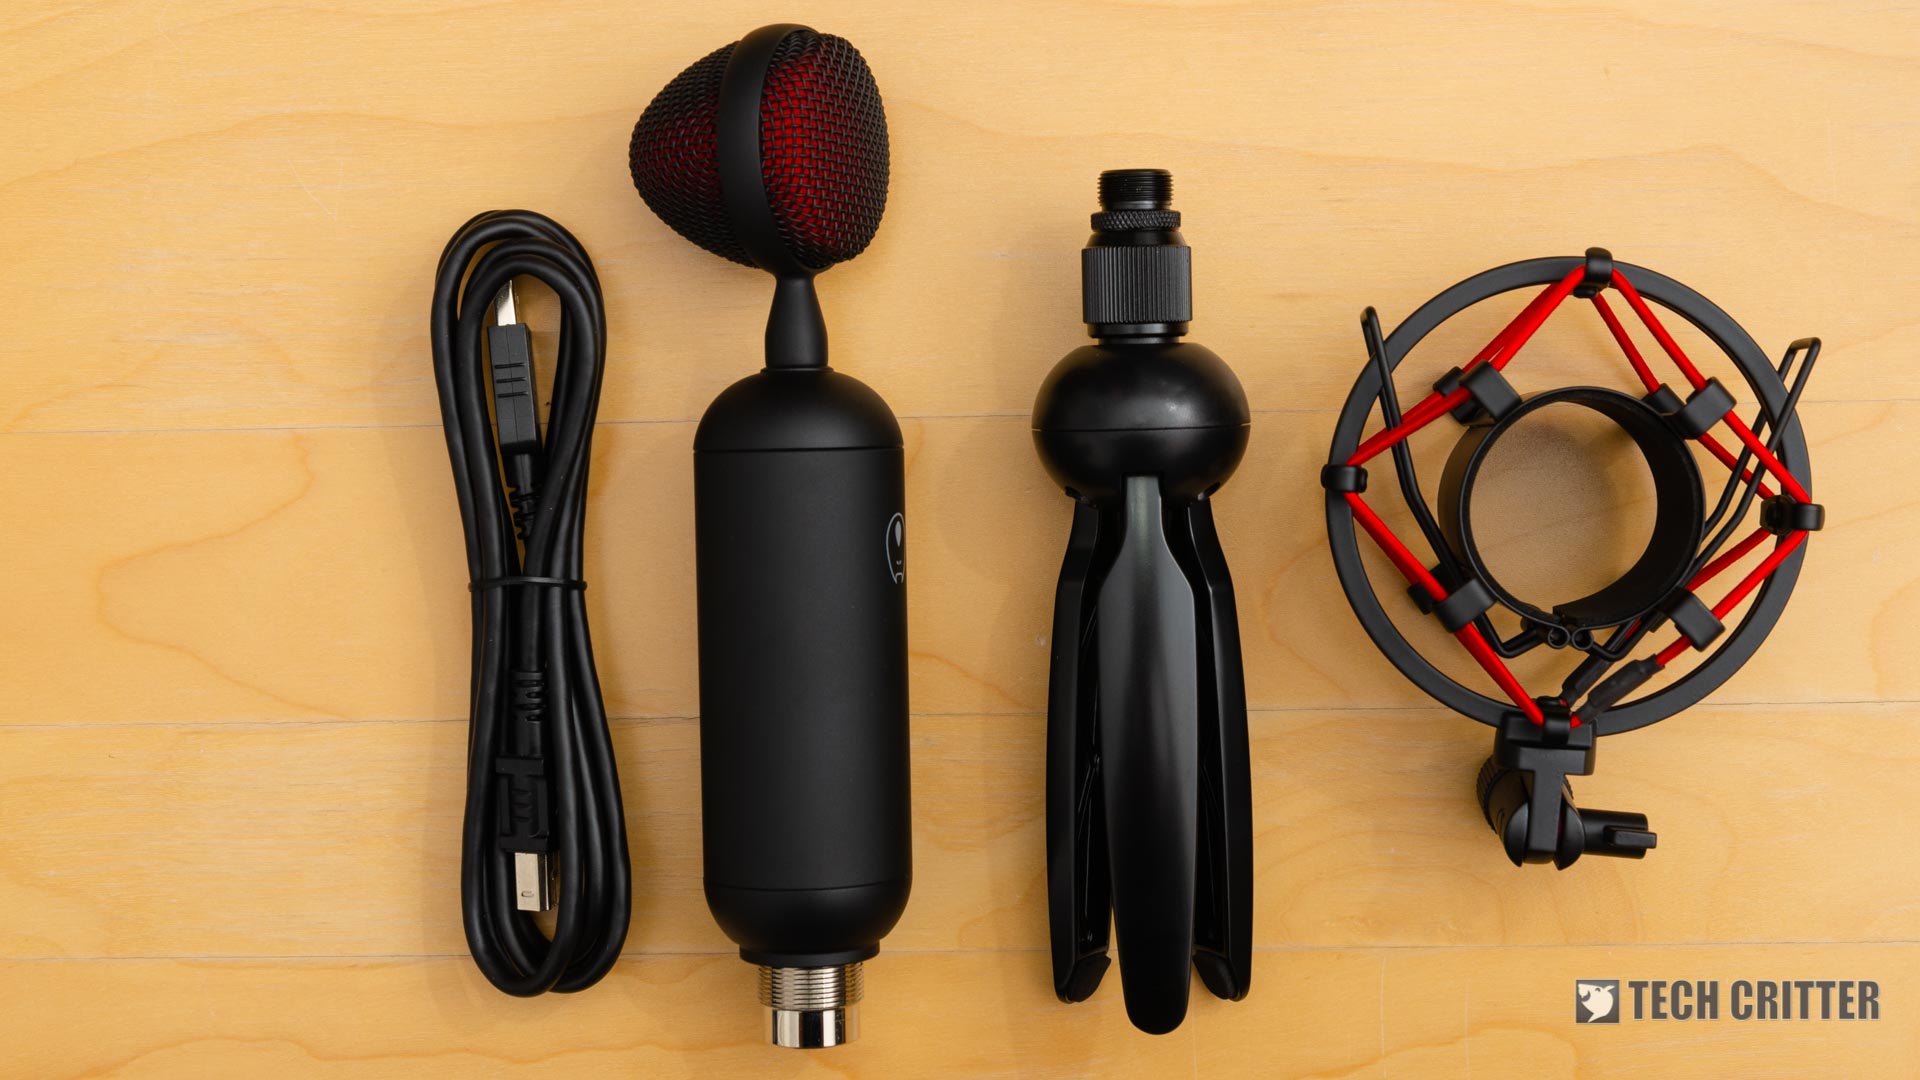 Review - Gaming Freak Chanter Bullet: Great for plug & play